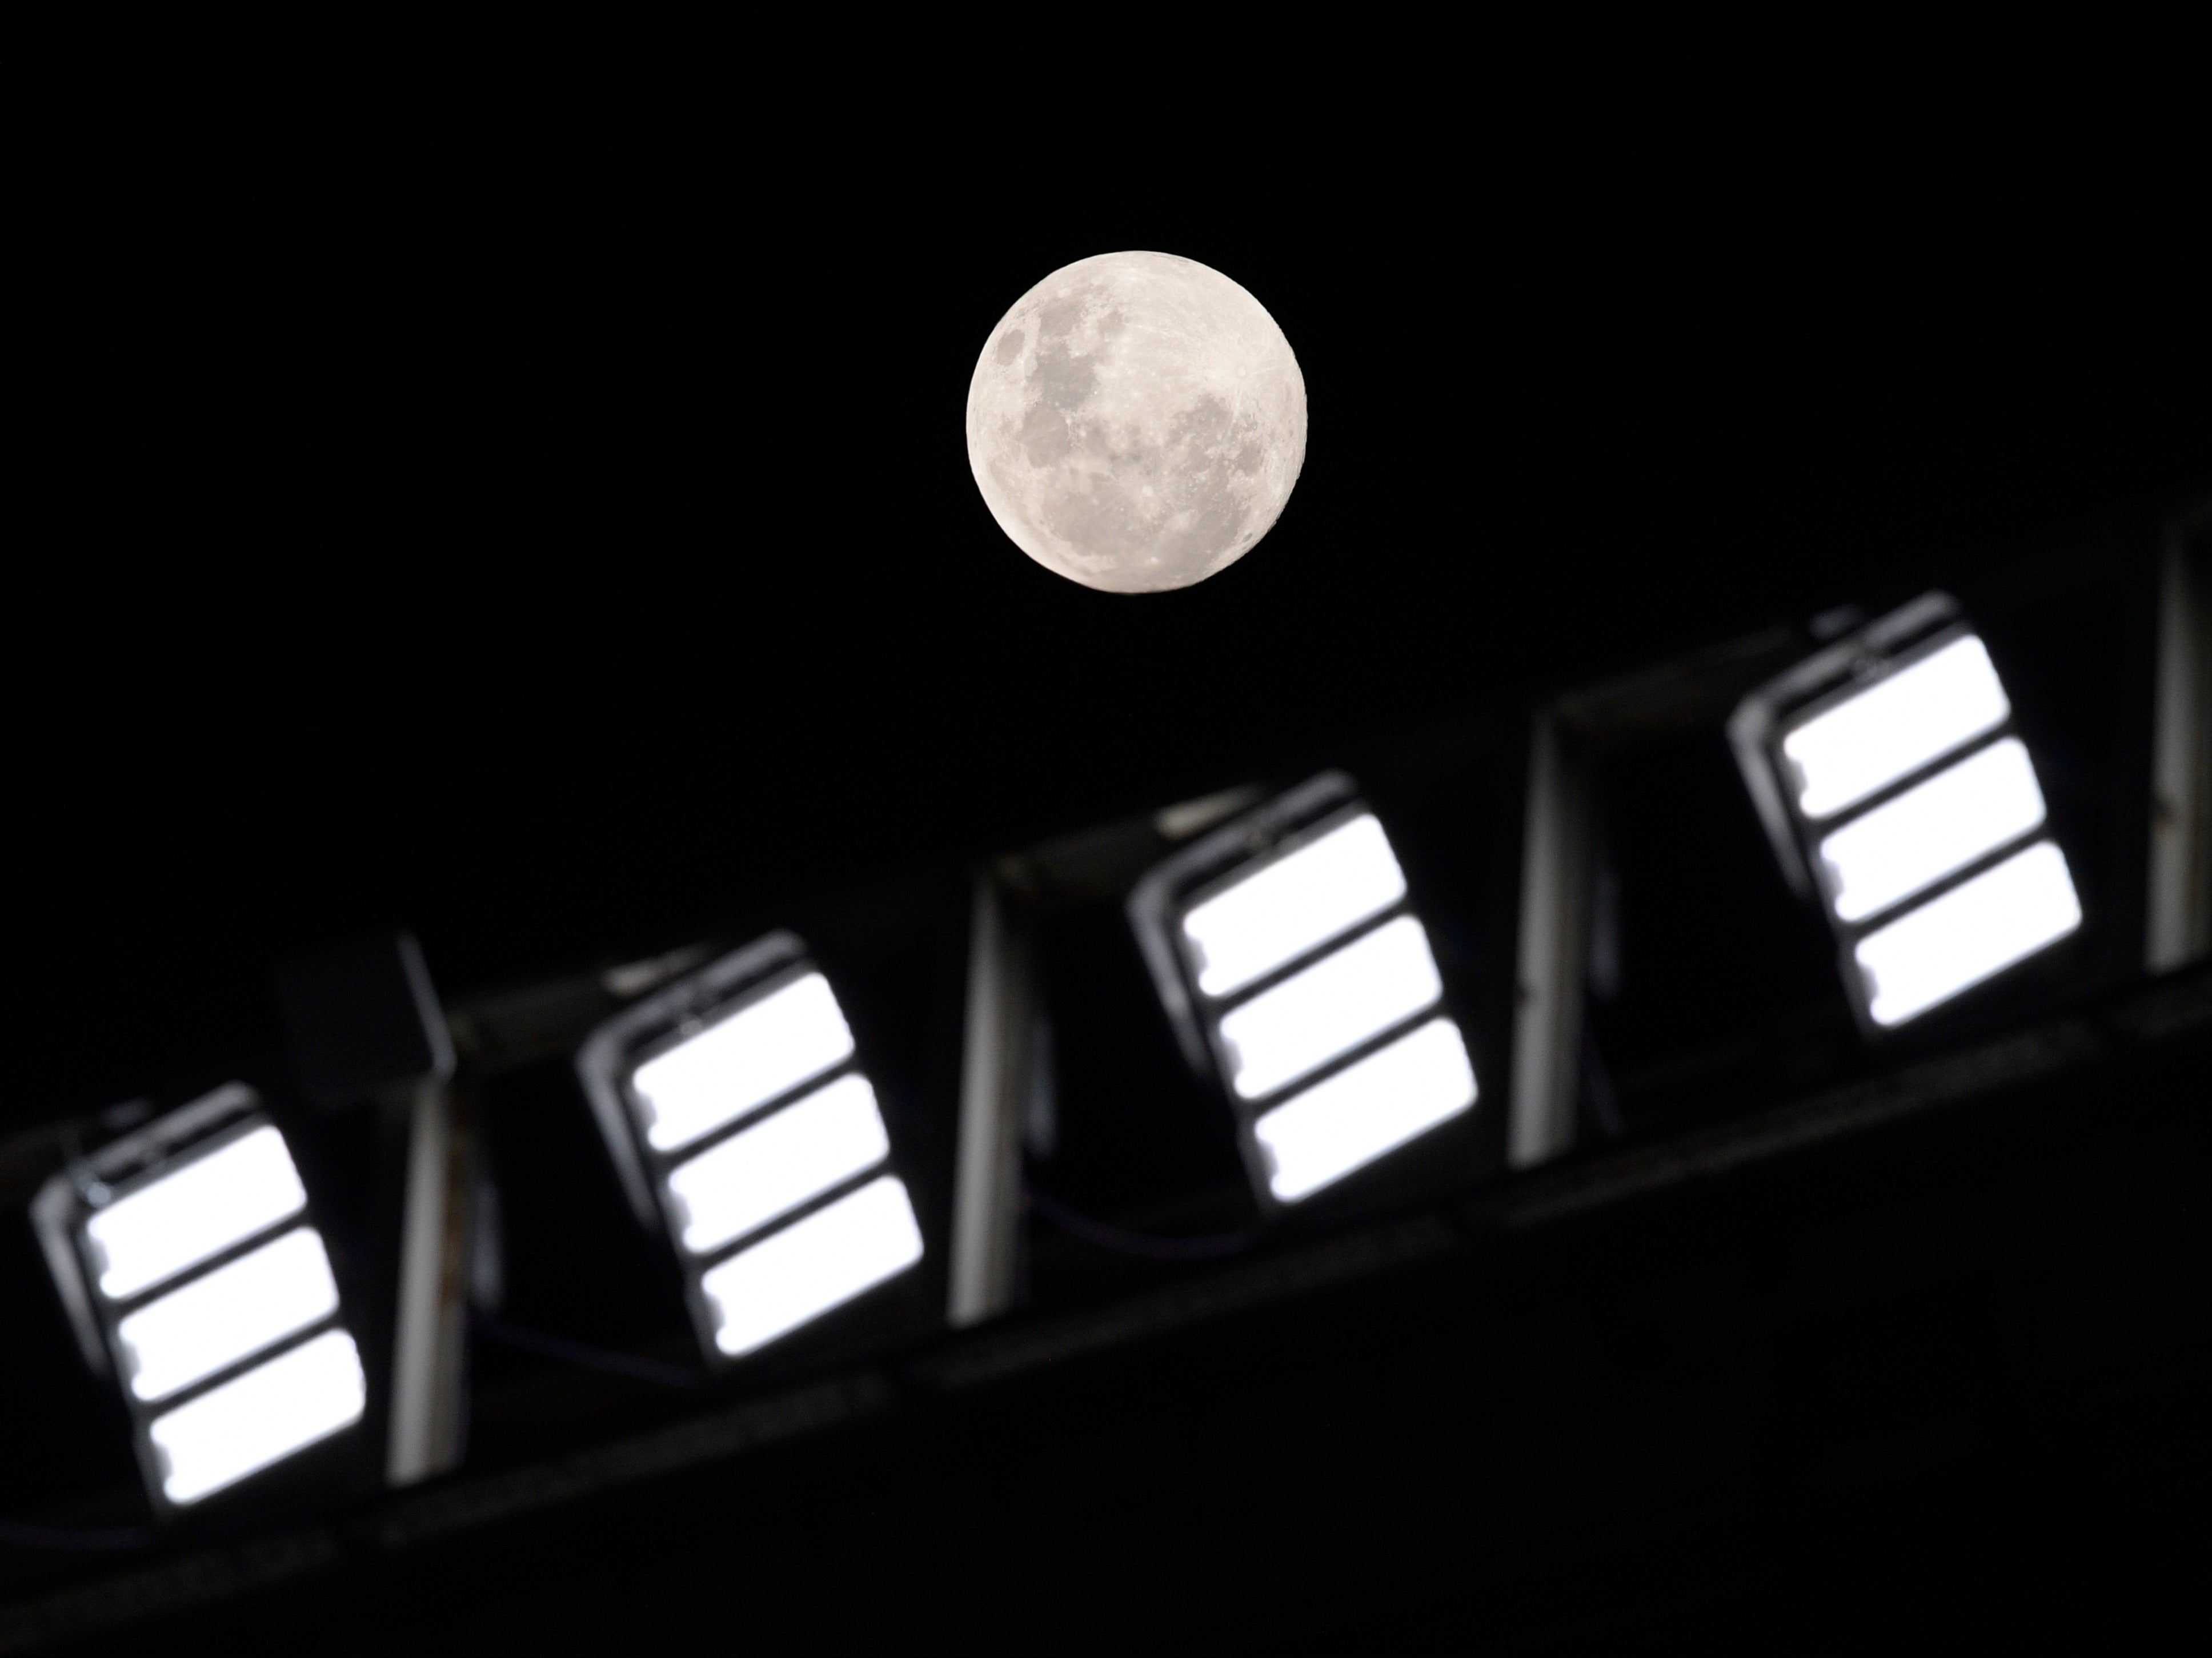 The moon soars over the Estadio Monumental in Buenos Aires, Argentina, as the Copa Libertadores match between River Plate and Fluminense gets underway